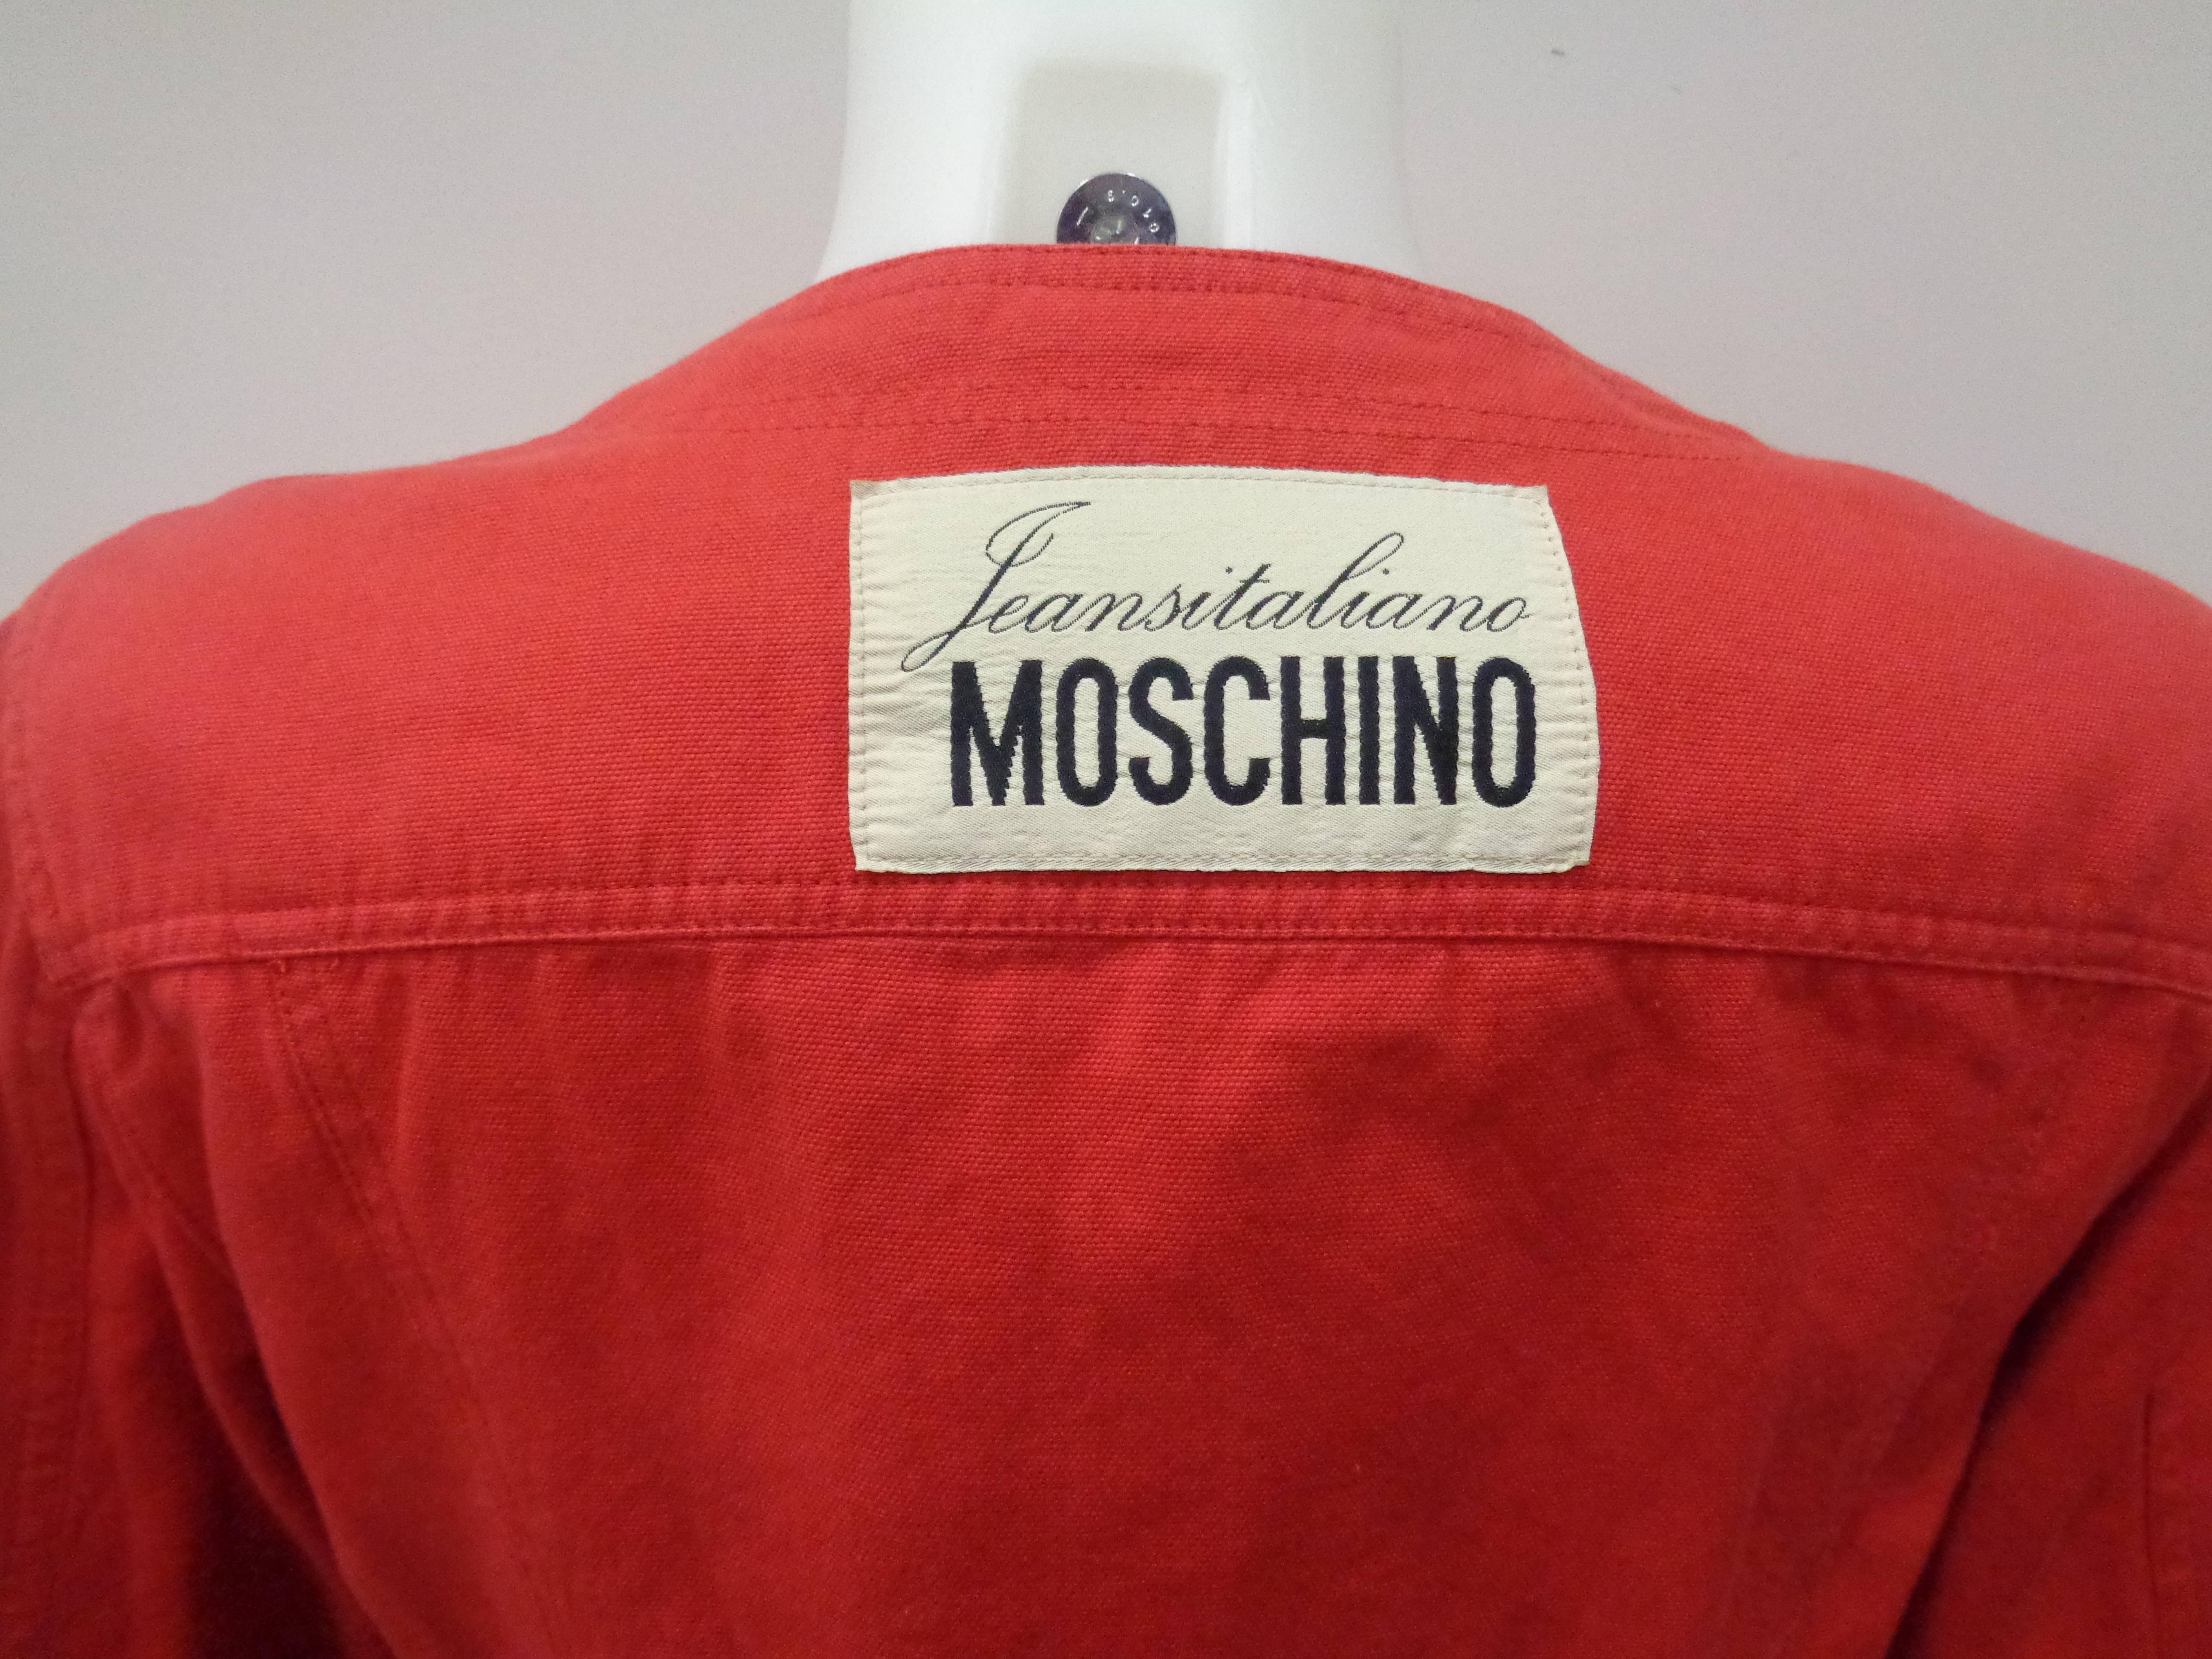 Moschino Jeans by Moschino Red Cotton Jacket 1